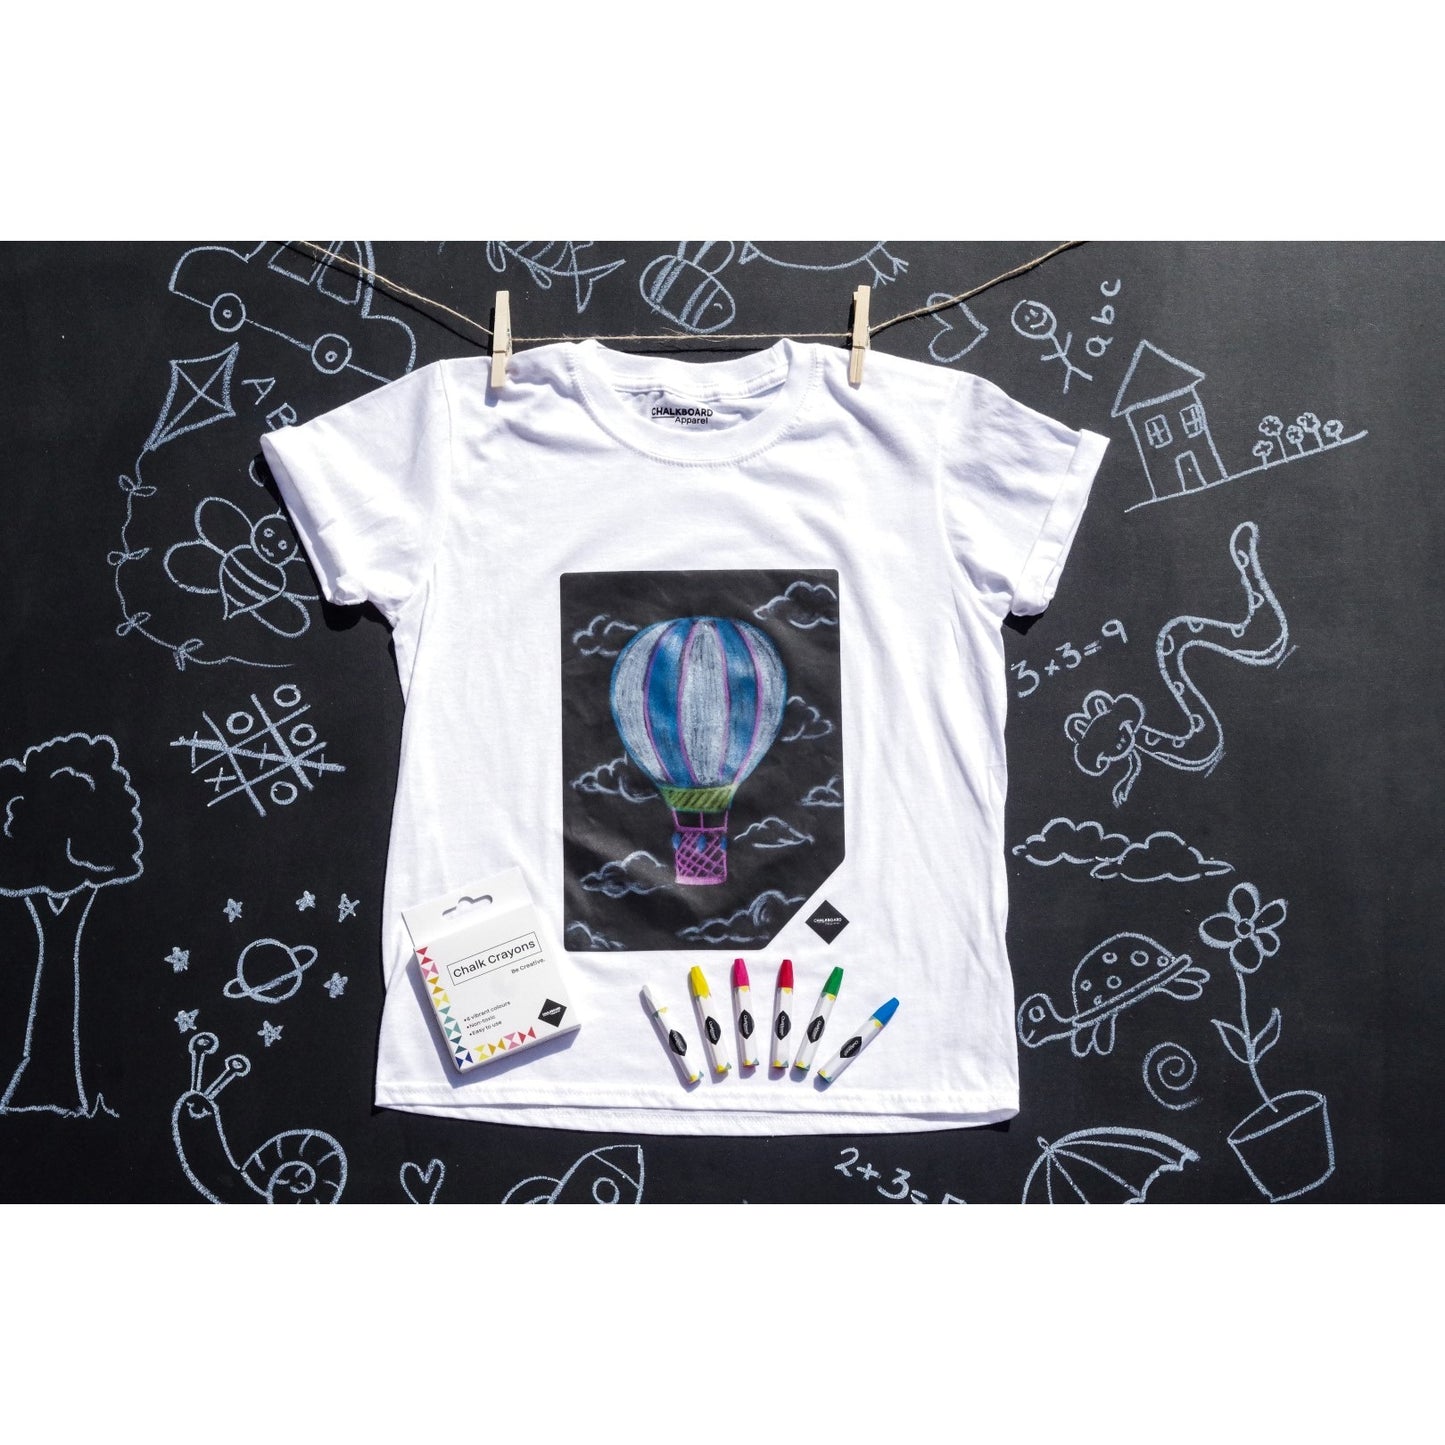 Chalkboard Apparel White T-Shirt - Draw on Your T-Shirt